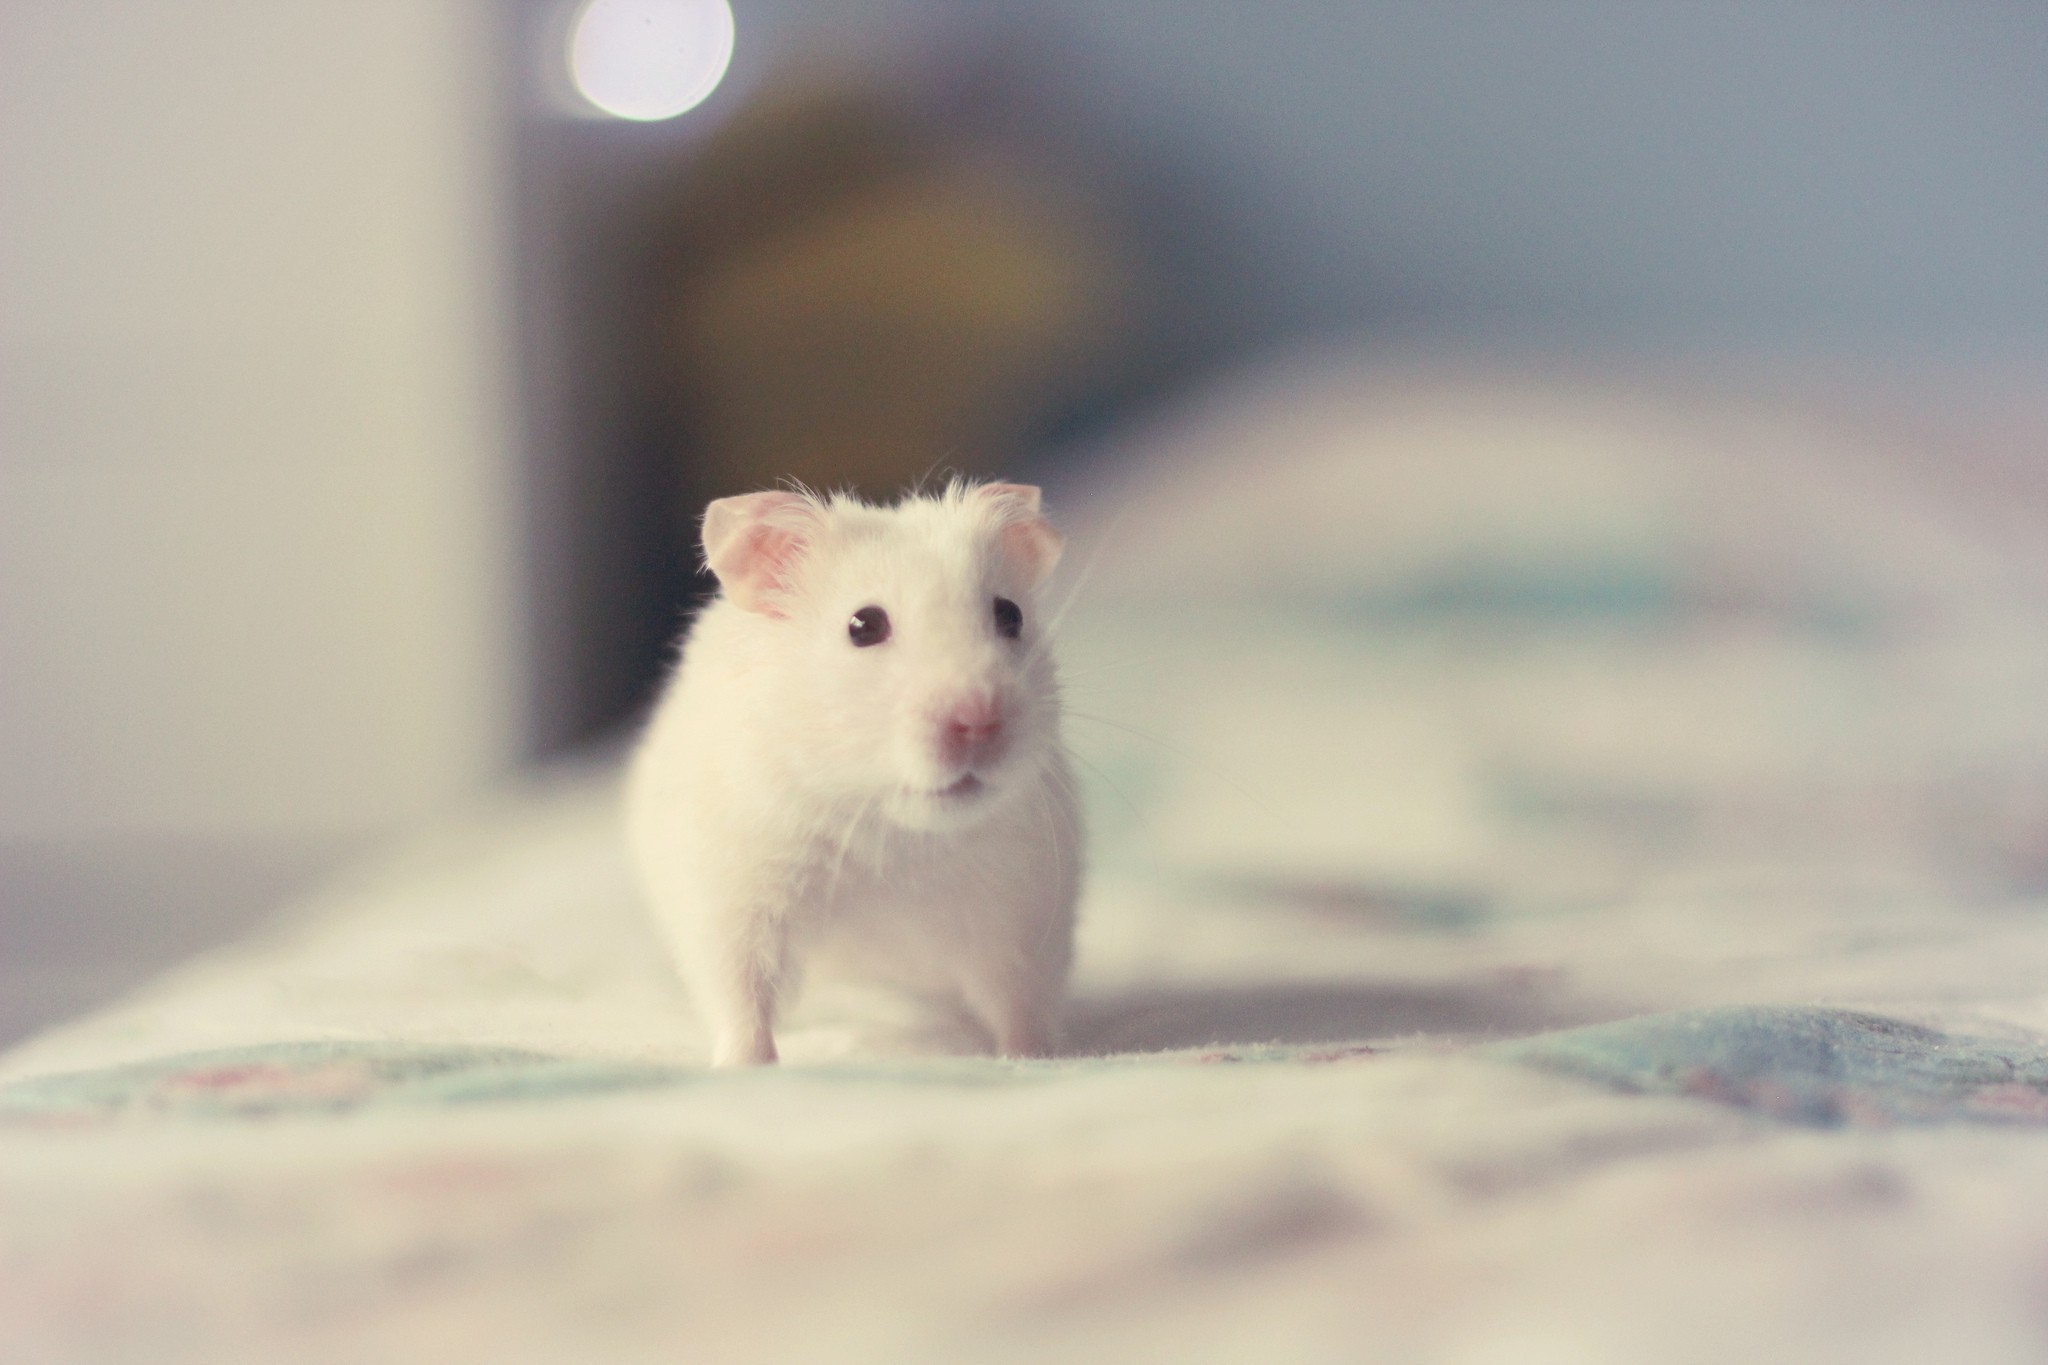 General 2048x1365 animals mammals hamster closeup blurred blurry background depth of field whiskers fur